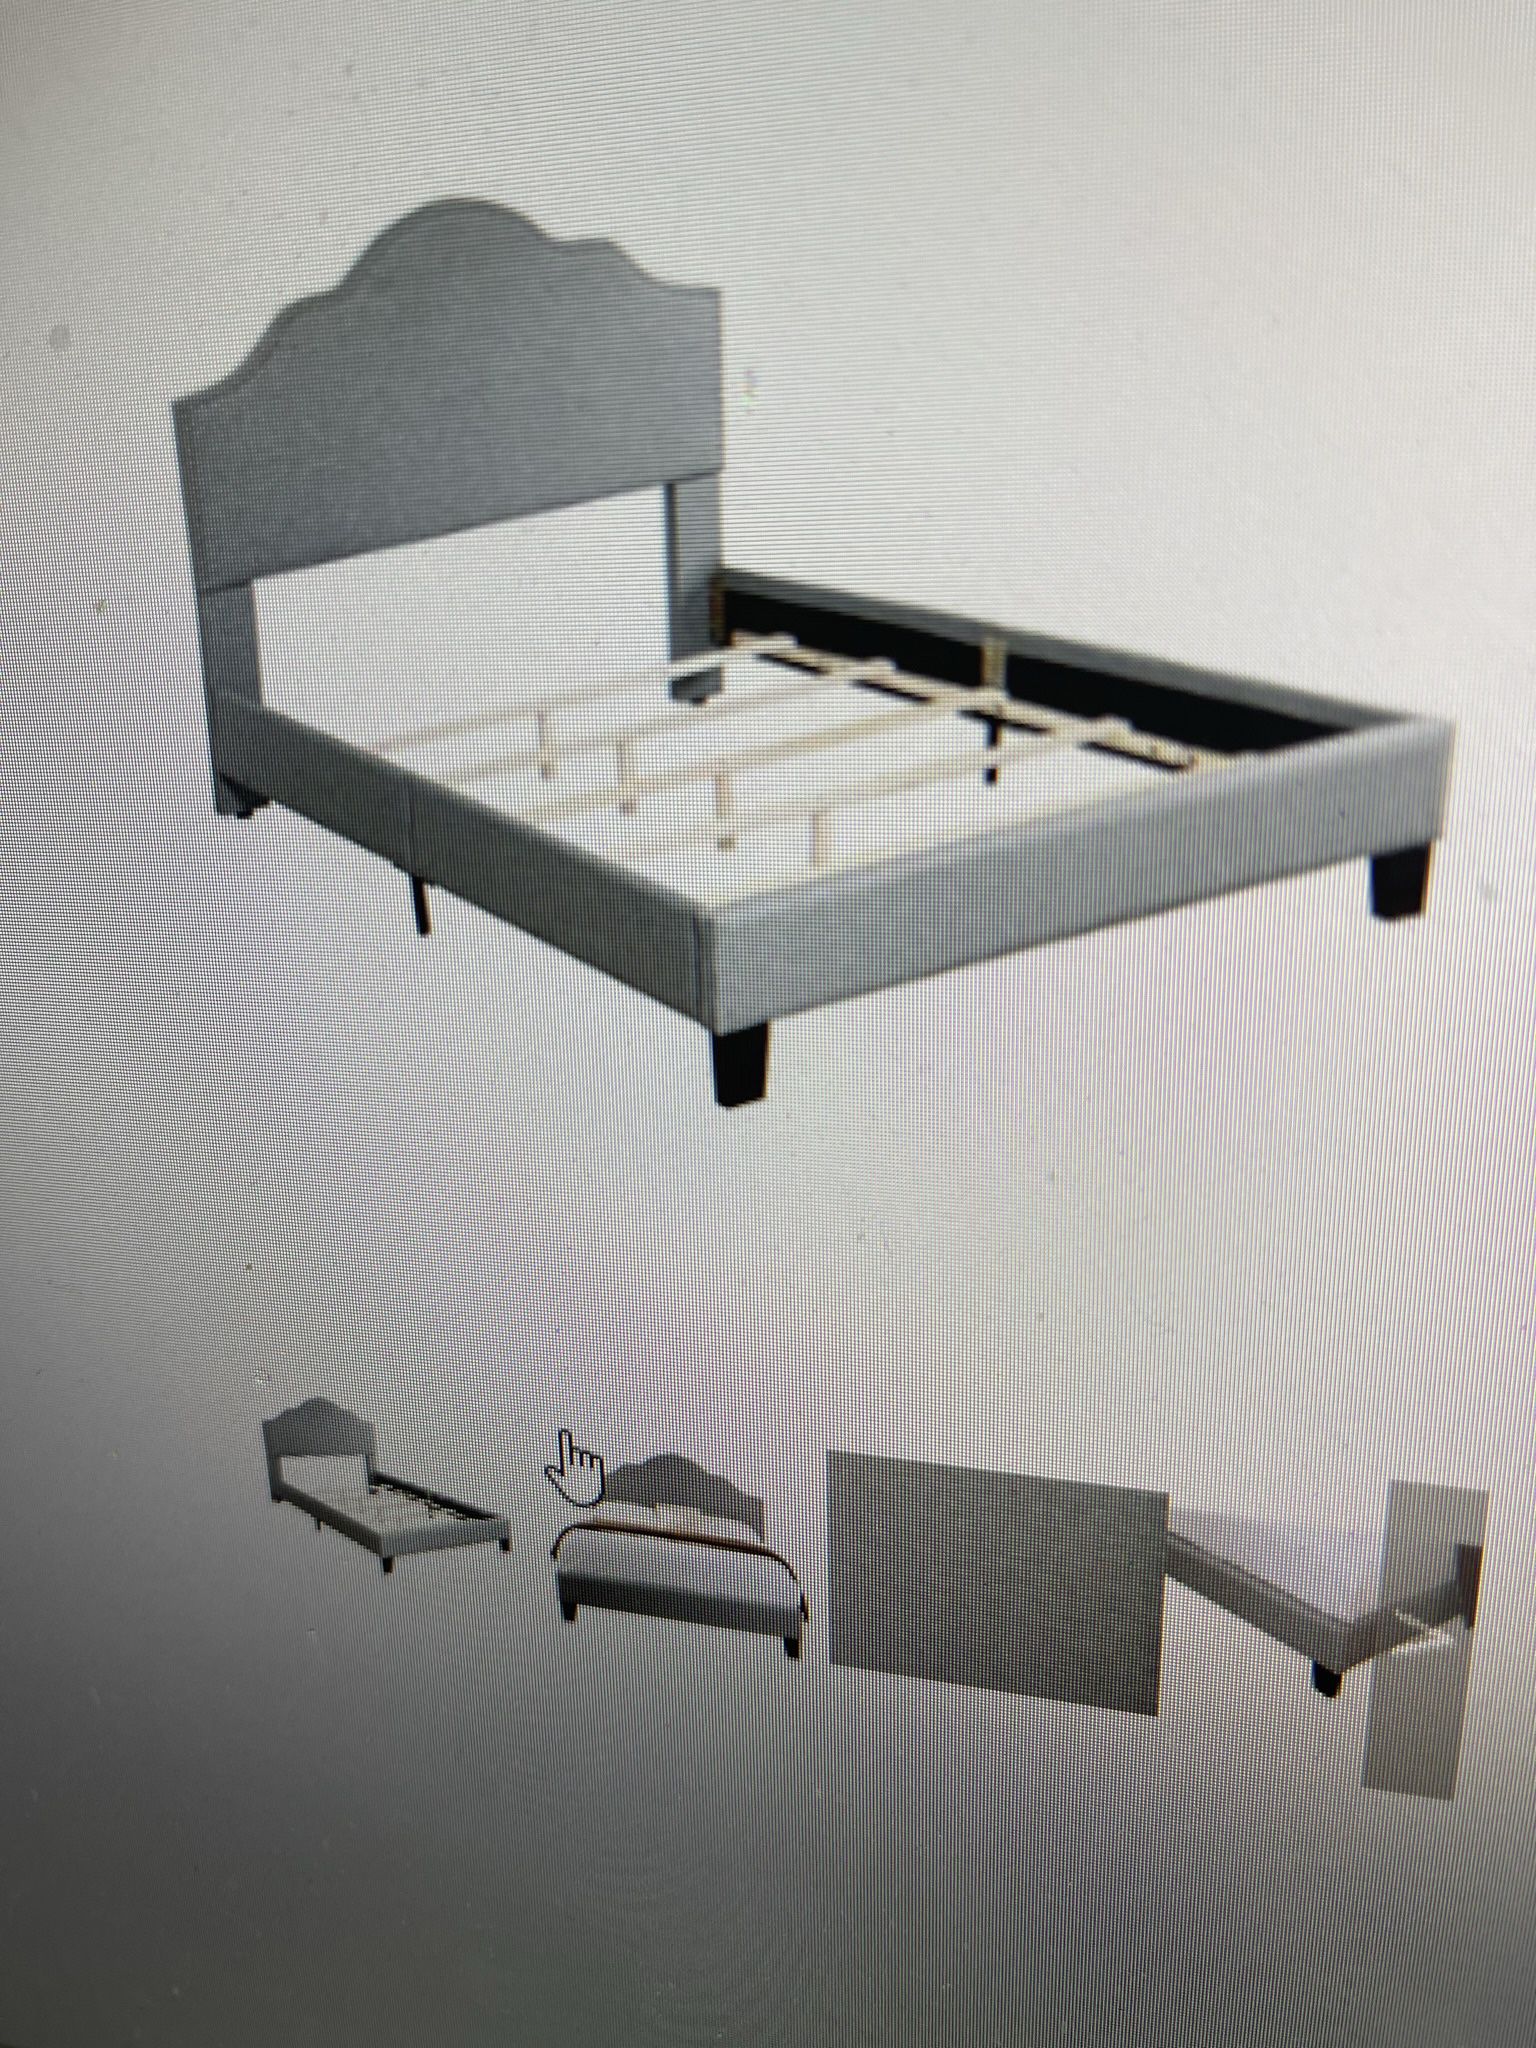 Queen Bed Frame On Sale